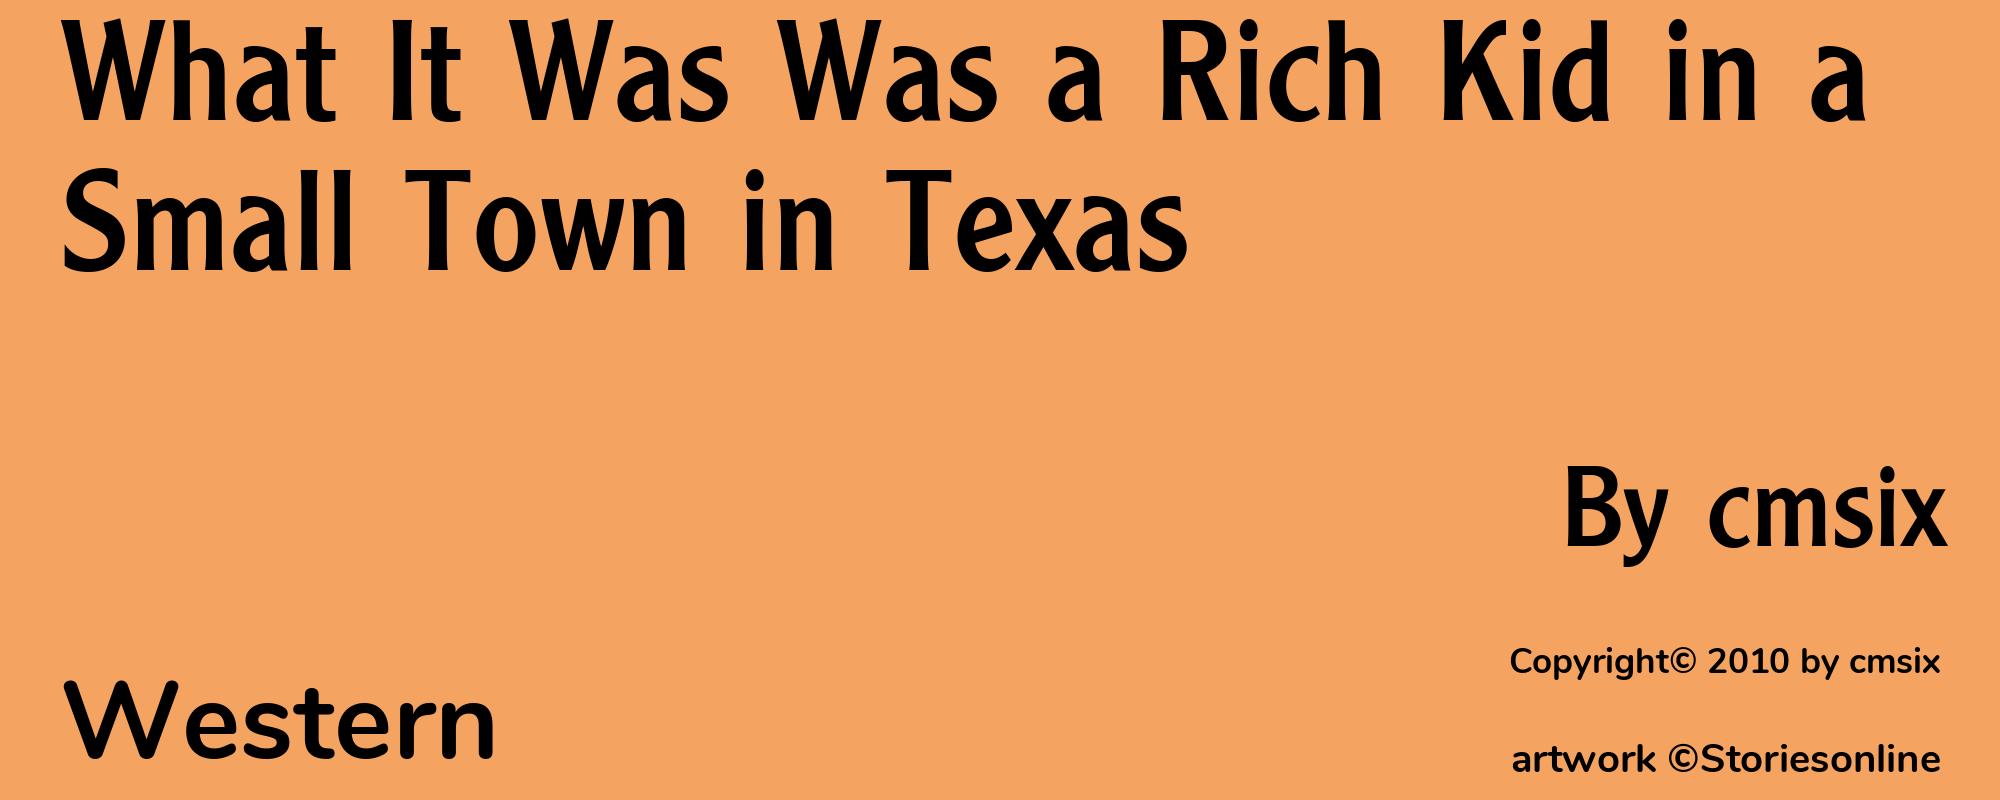 What It Was Was a Rich Kid in a Small Town in Texas - Cover